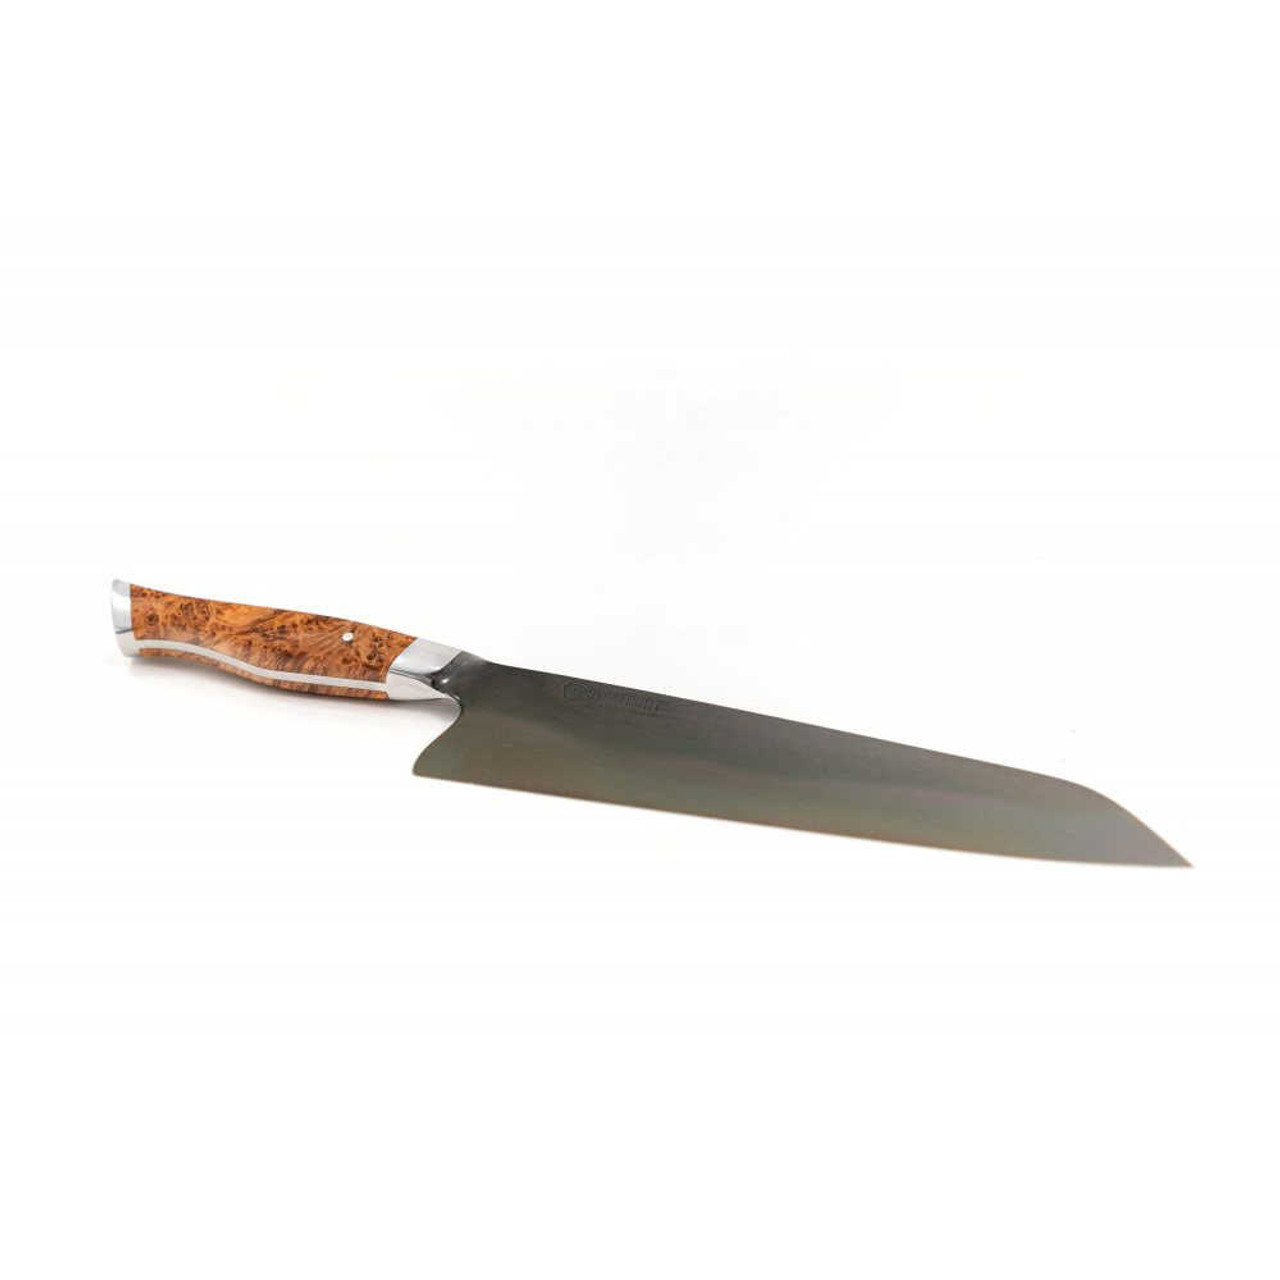 https://cdn11.bigcommerce.com/s-hccytny0od/images/stencil/1280x1280/products/4795/19603/STEELPORT_Chefs_Knife_8-Inch_4__76029.1655836548.jpg?c=2?imbypass=on